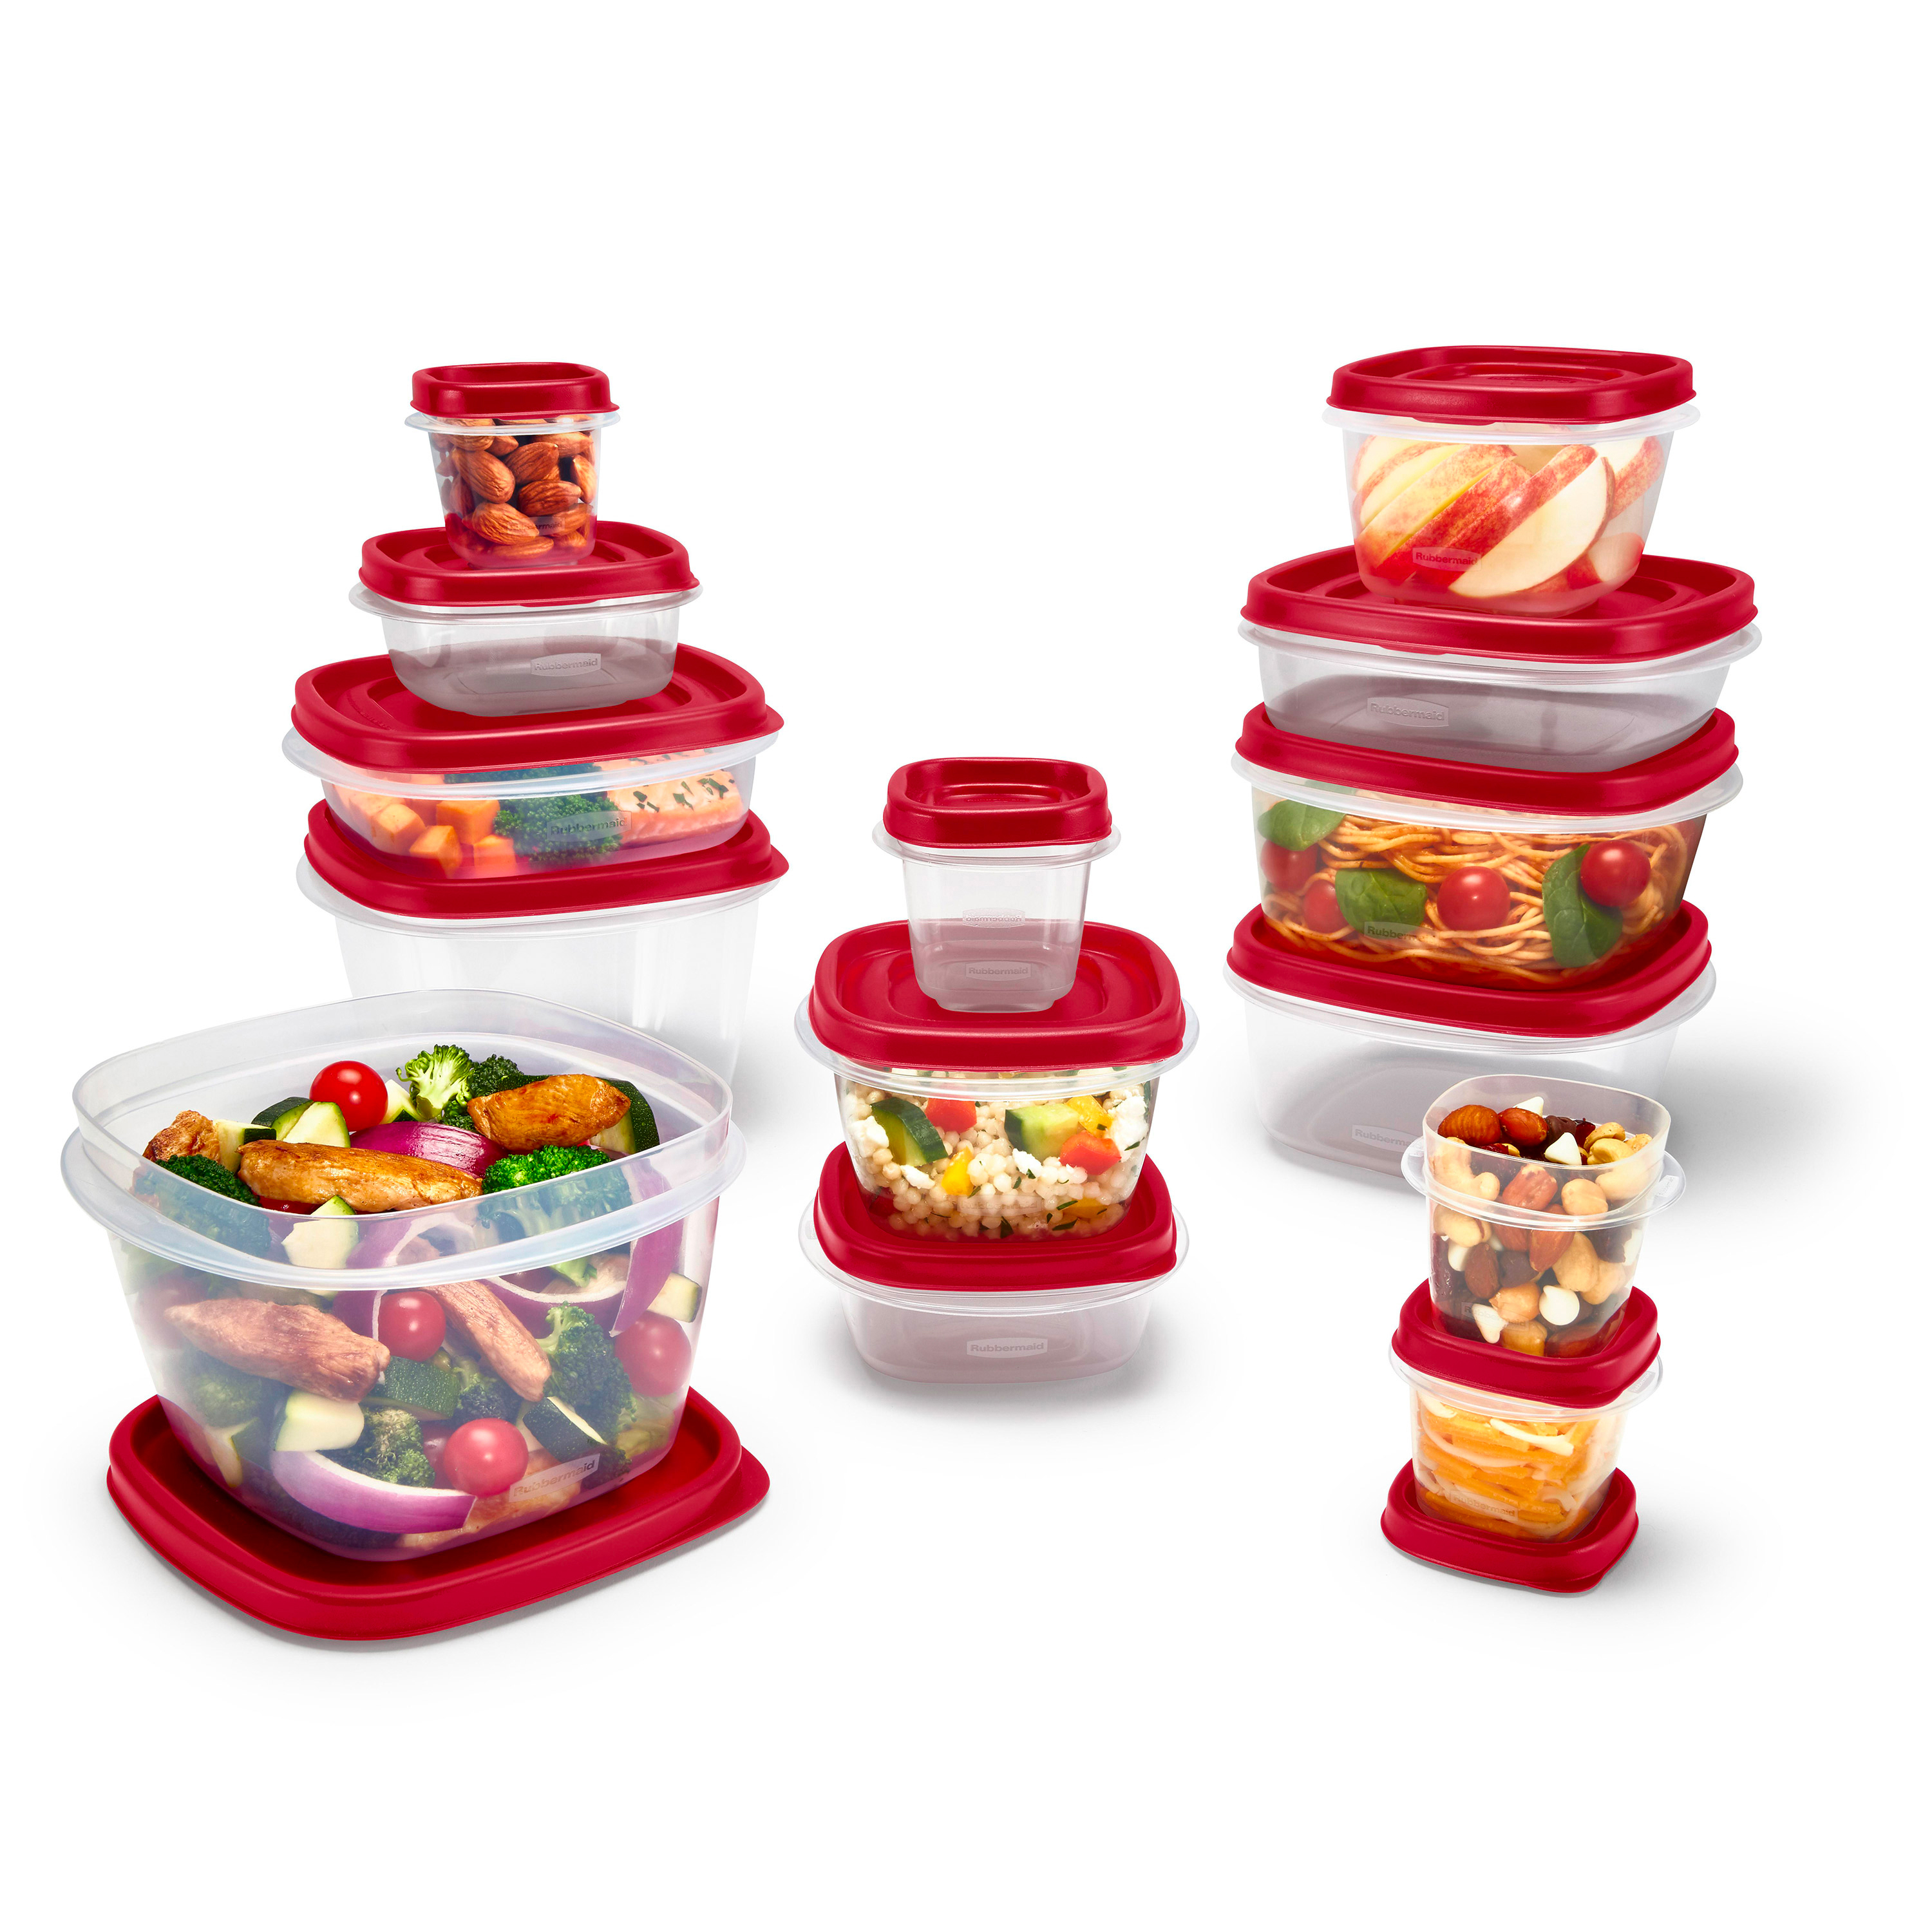 Rubbermaid, Easy Find Lids, Food Storage Containers with Vented Lids, 28-Piece Set - image 1 of 12